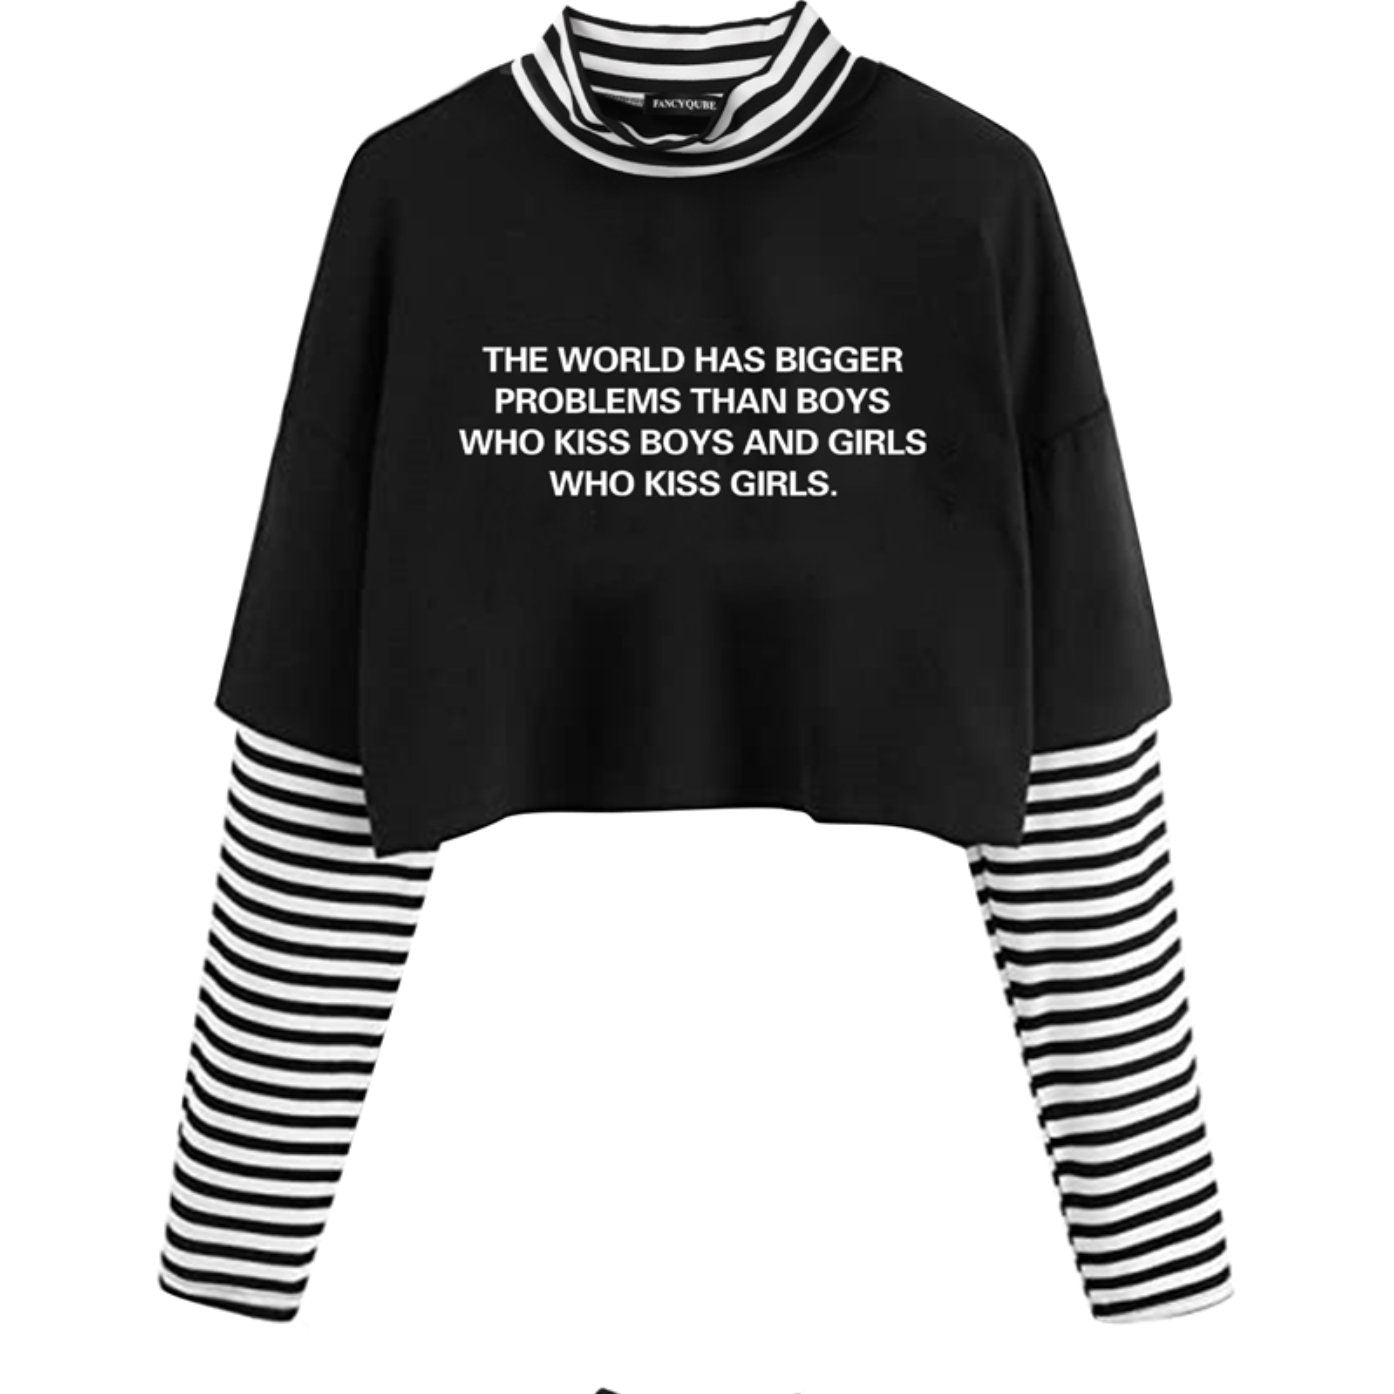 Hipgoth gothic Hop Harajuku T-shirts Fake gay 2 Piece Cropped Top Women Gothic Graphic Printed Slim Long Sleeve Summer Kawaii Tee for Ladies # 264